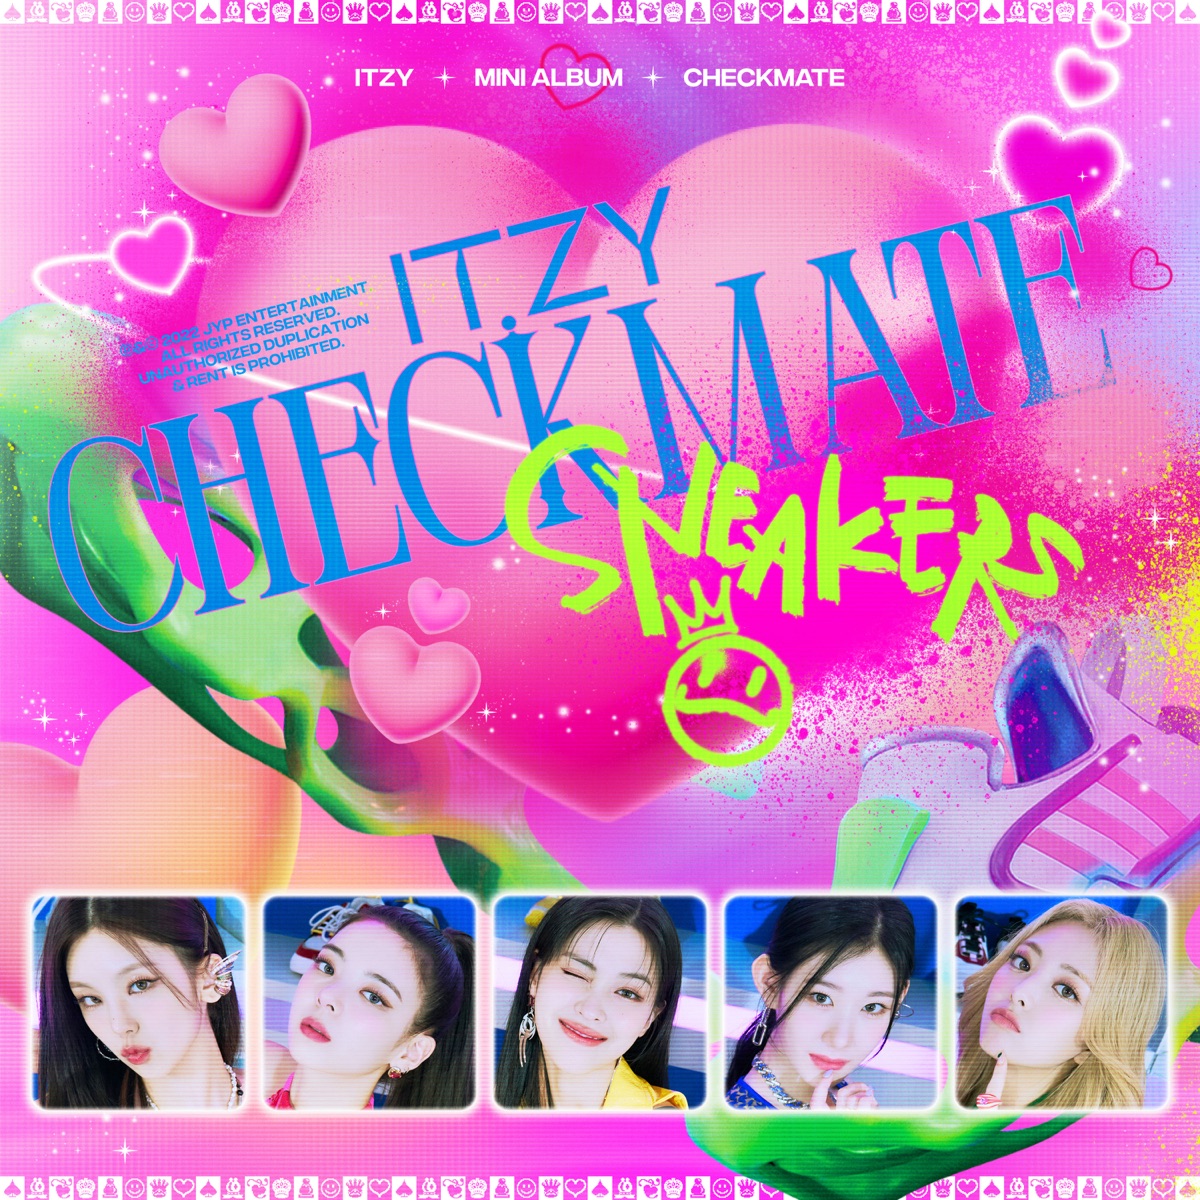 ITZY — CHECKMATE cover artwork